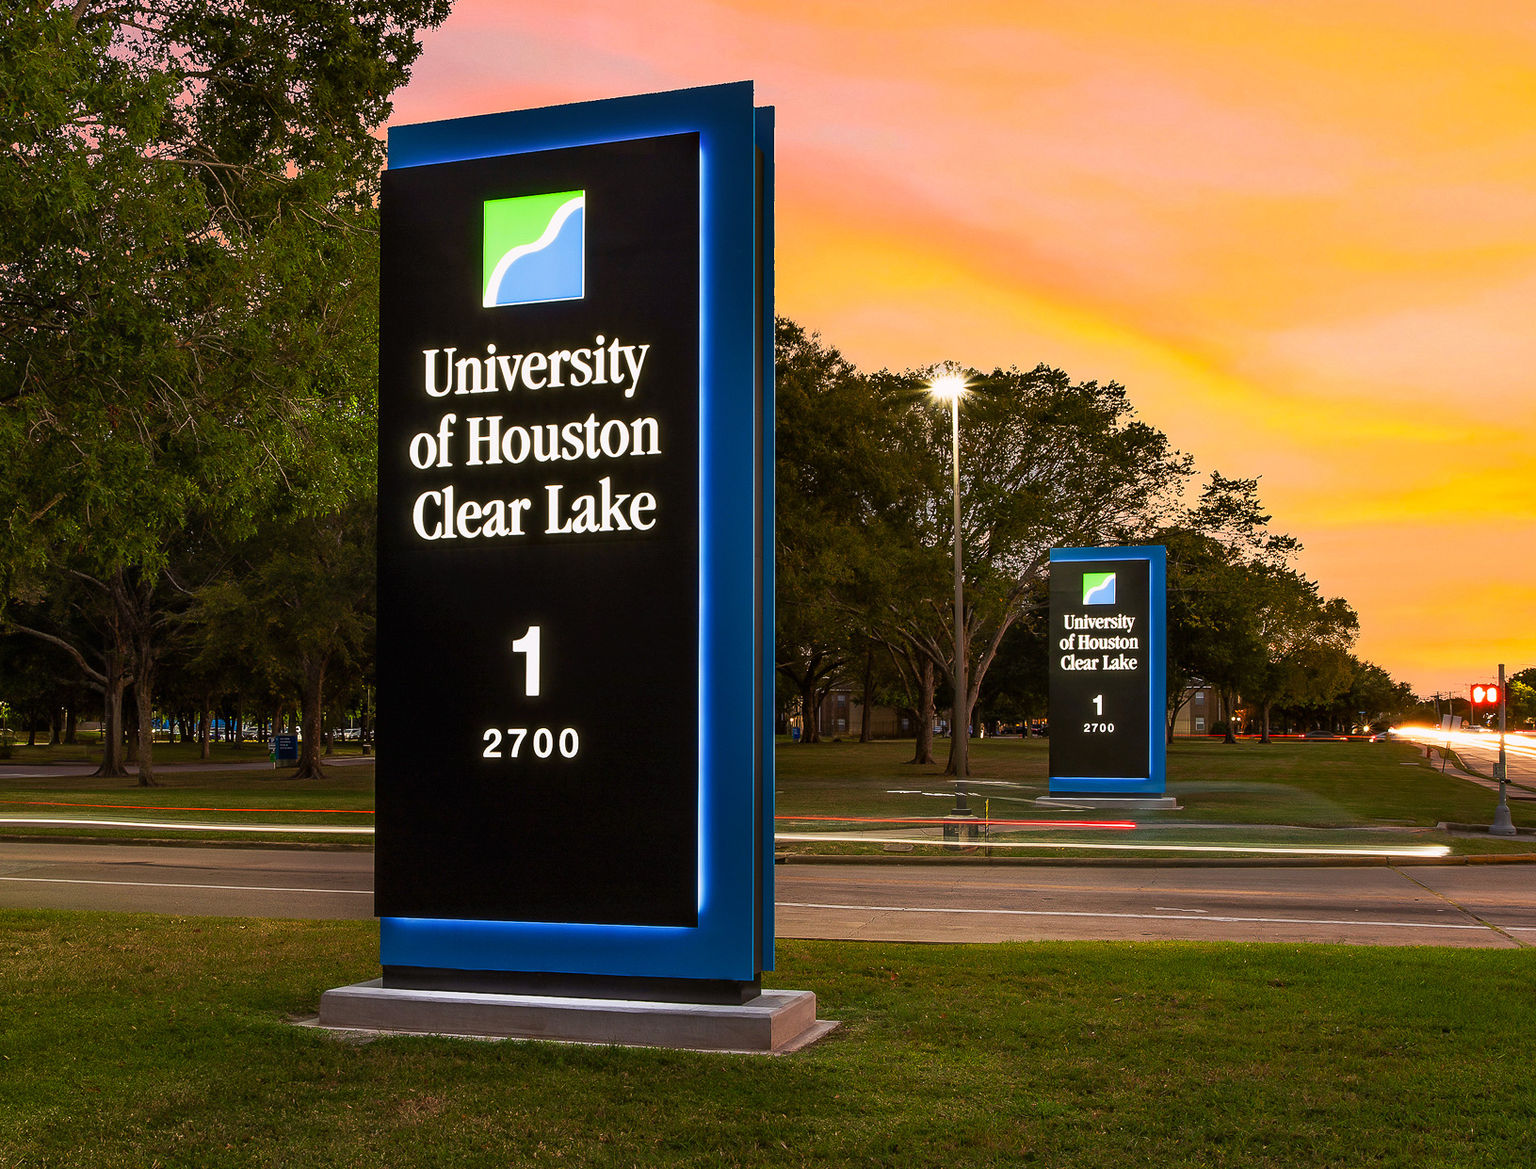 A twilight view of two sizeable illuminated branded monument signs at the main entrance of the University of Houston campus.